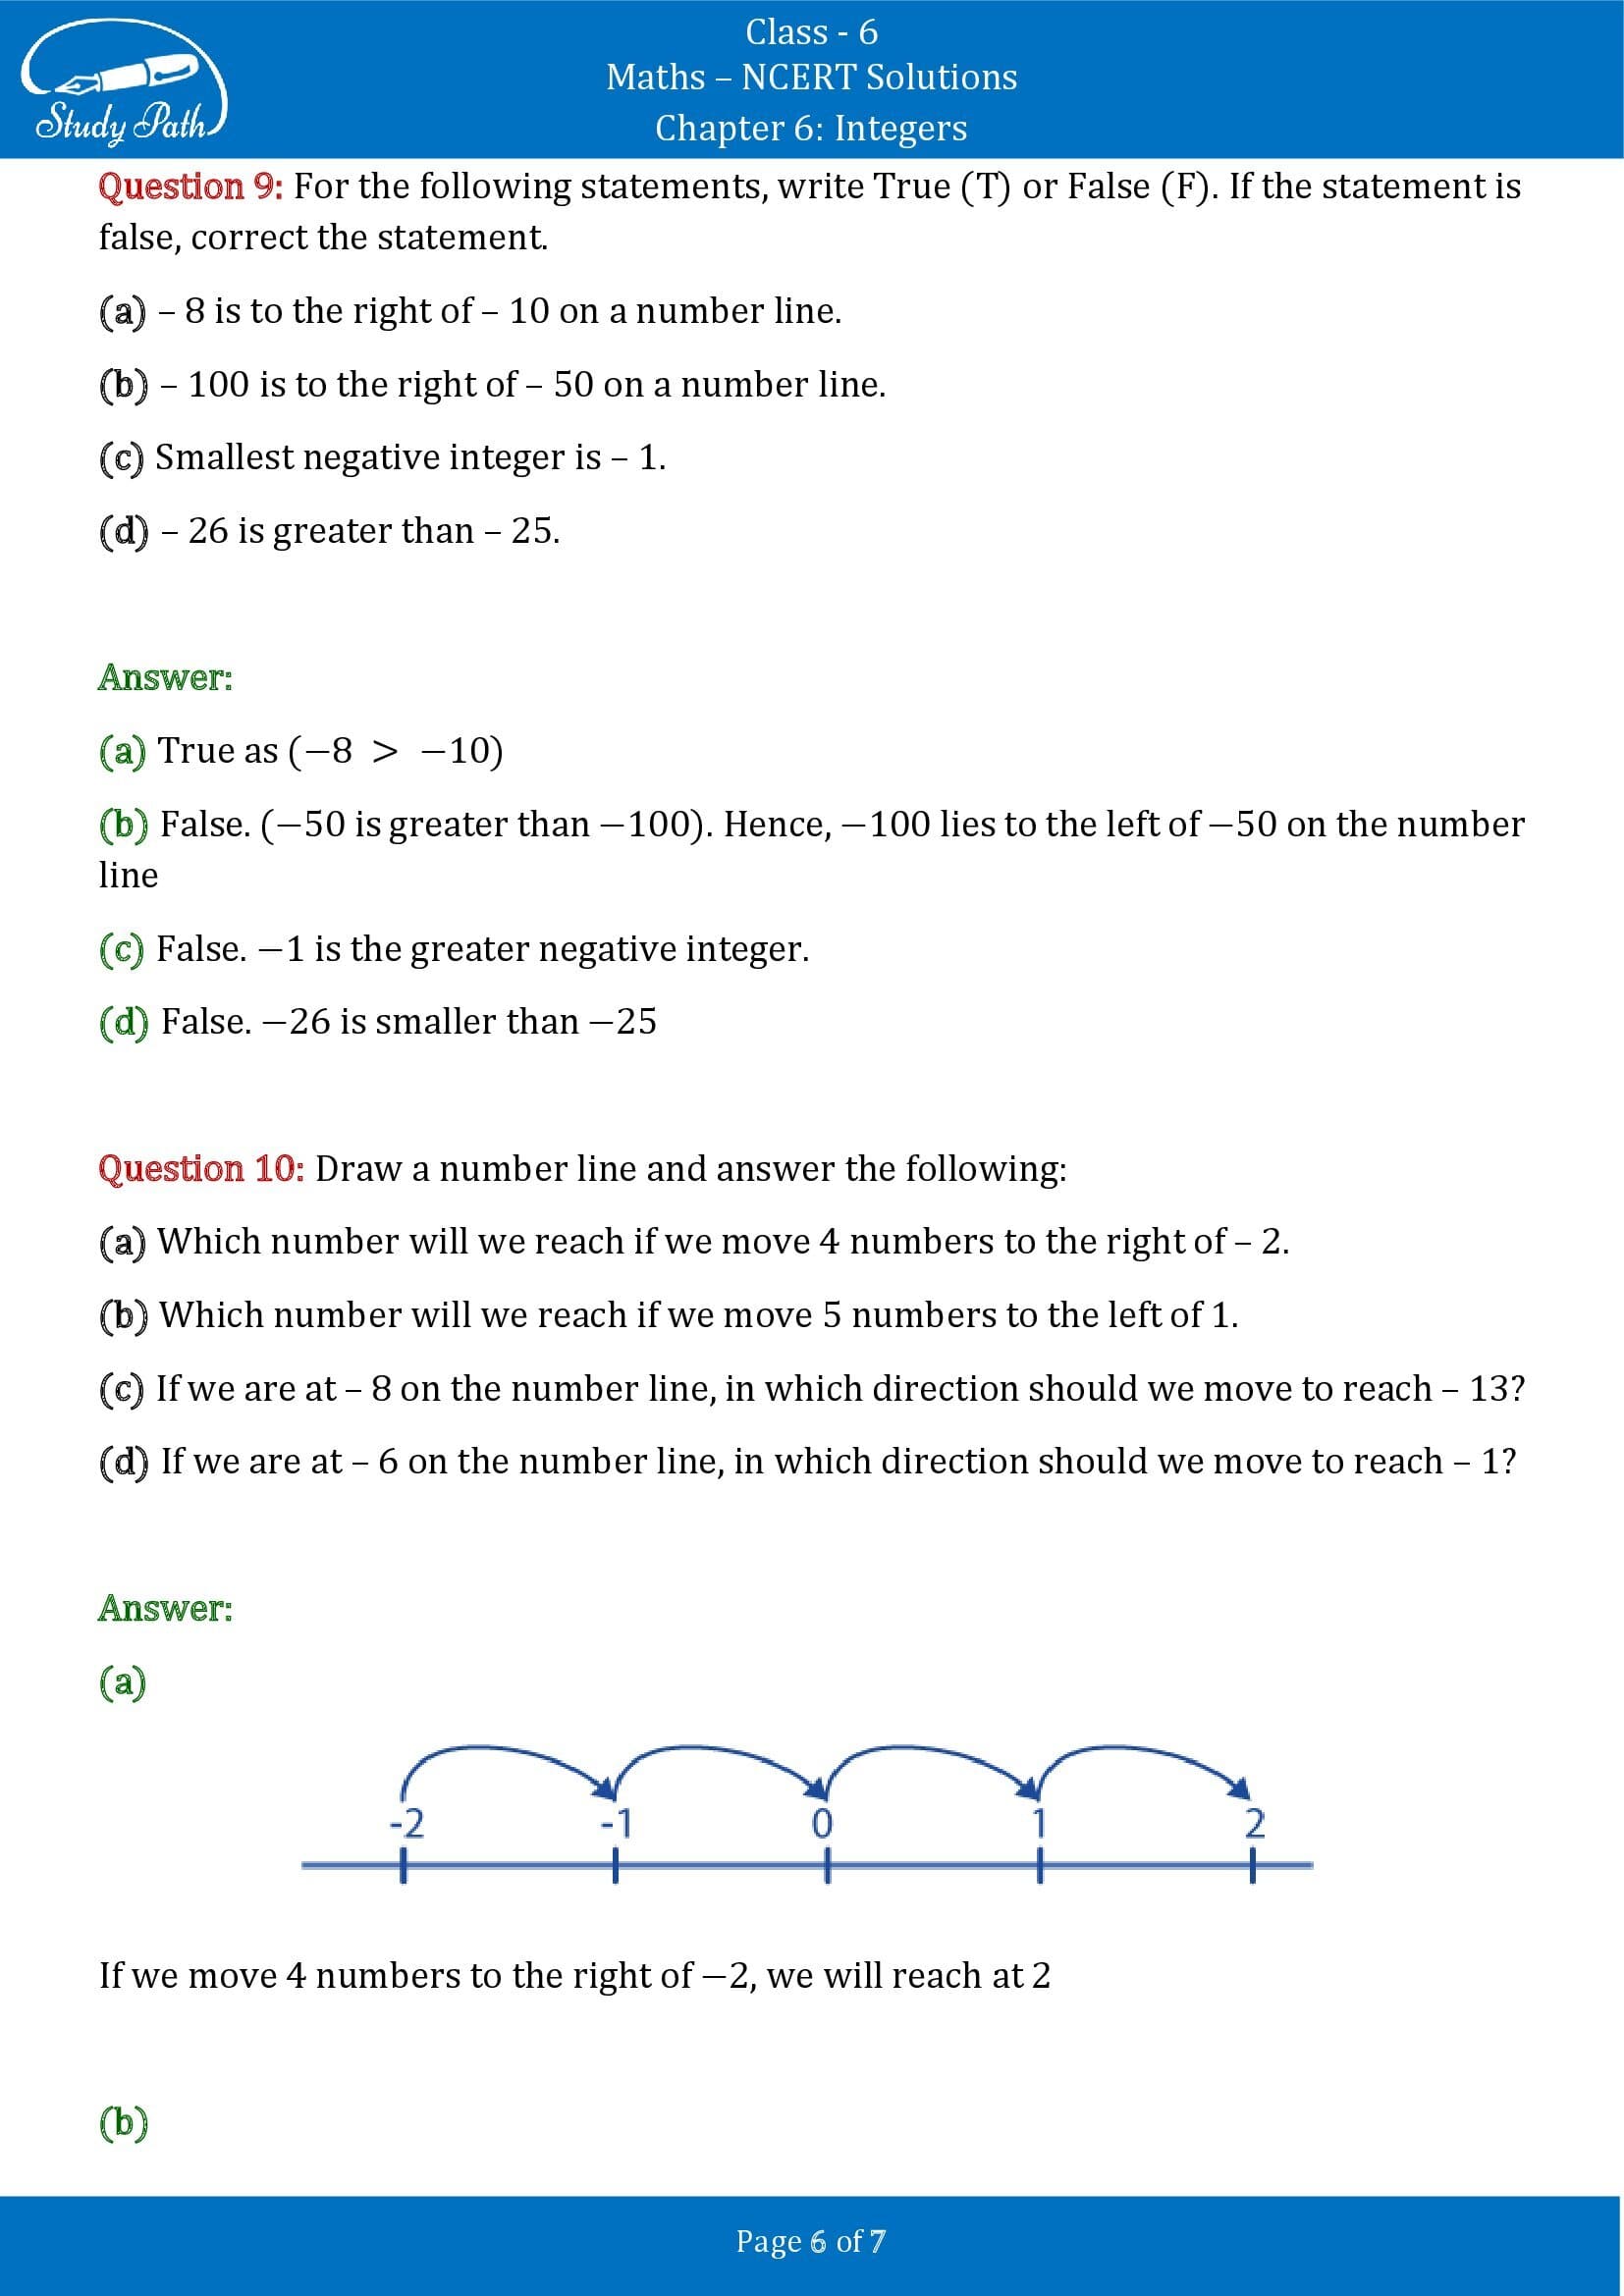 NCERT Solutions for Class 6 Maths Chapter 6 Integers Exercise 6.1 00006